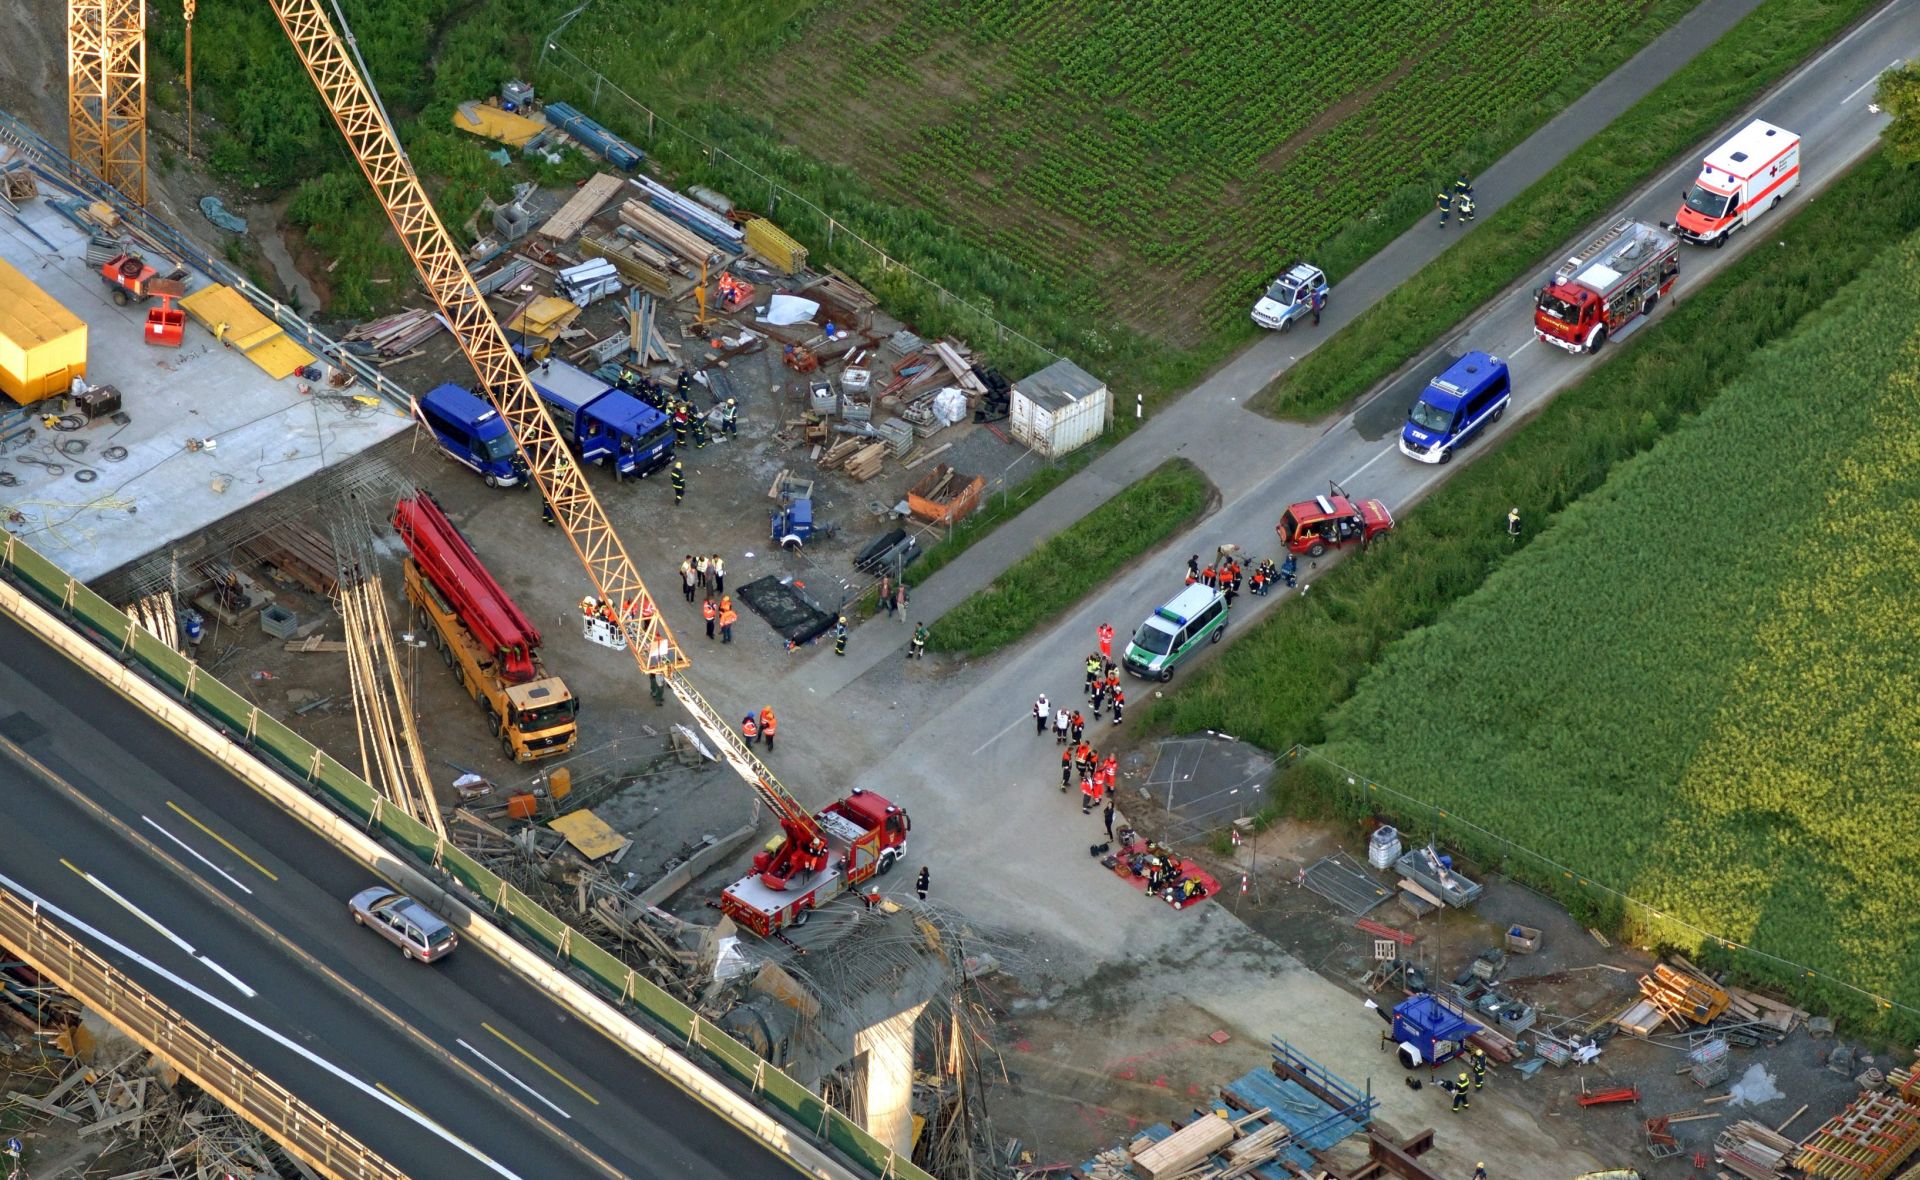 epa05368603 An aerial view of the site of the collapse of a part of the newly-built 'Talbruecke' replacement bridge, along the A7 motorway in Schraudenbach, near Werneck, Germany, 16 June 2016. One construction worker was killed and several others injured in the collapse at the construction site for a new highway bridge. Investigations into the cause of the accident are reportedly underway.  EPA/HAJO DIETZ